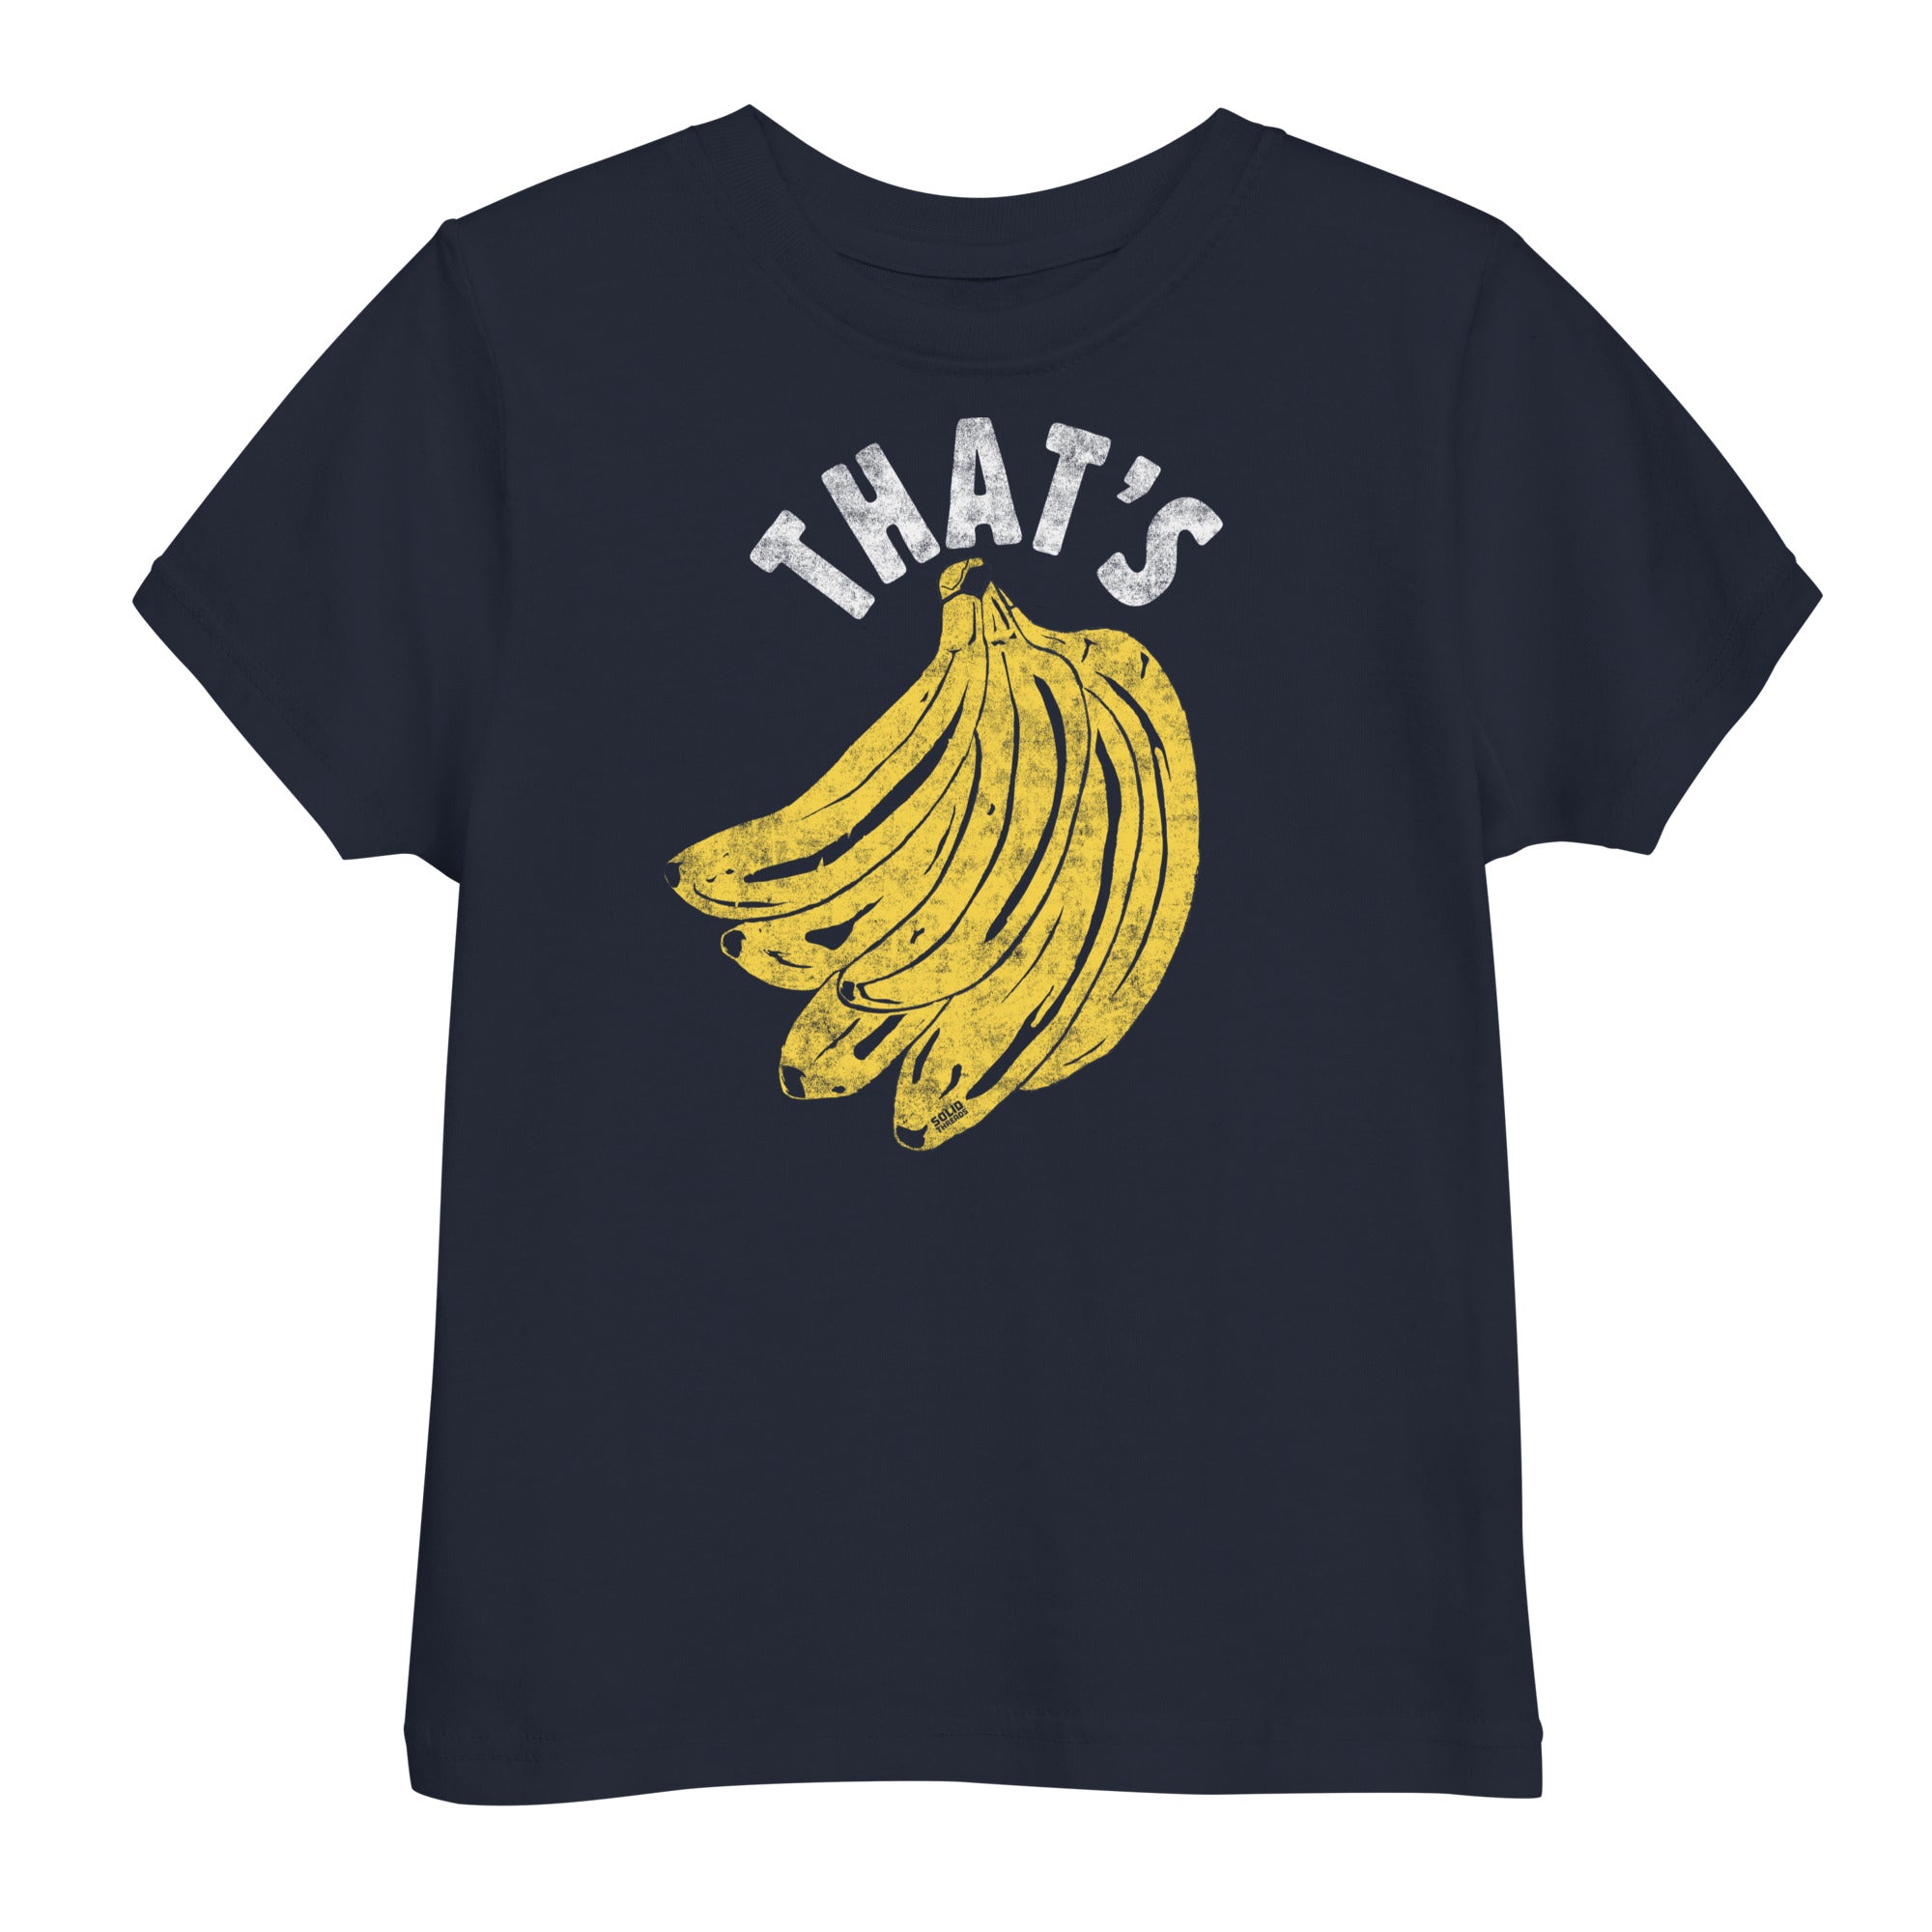 Toddler's That's Bananas Retro Vegan Extra Soft T-Shirt | Funny Fruit Tee | Solid Threads